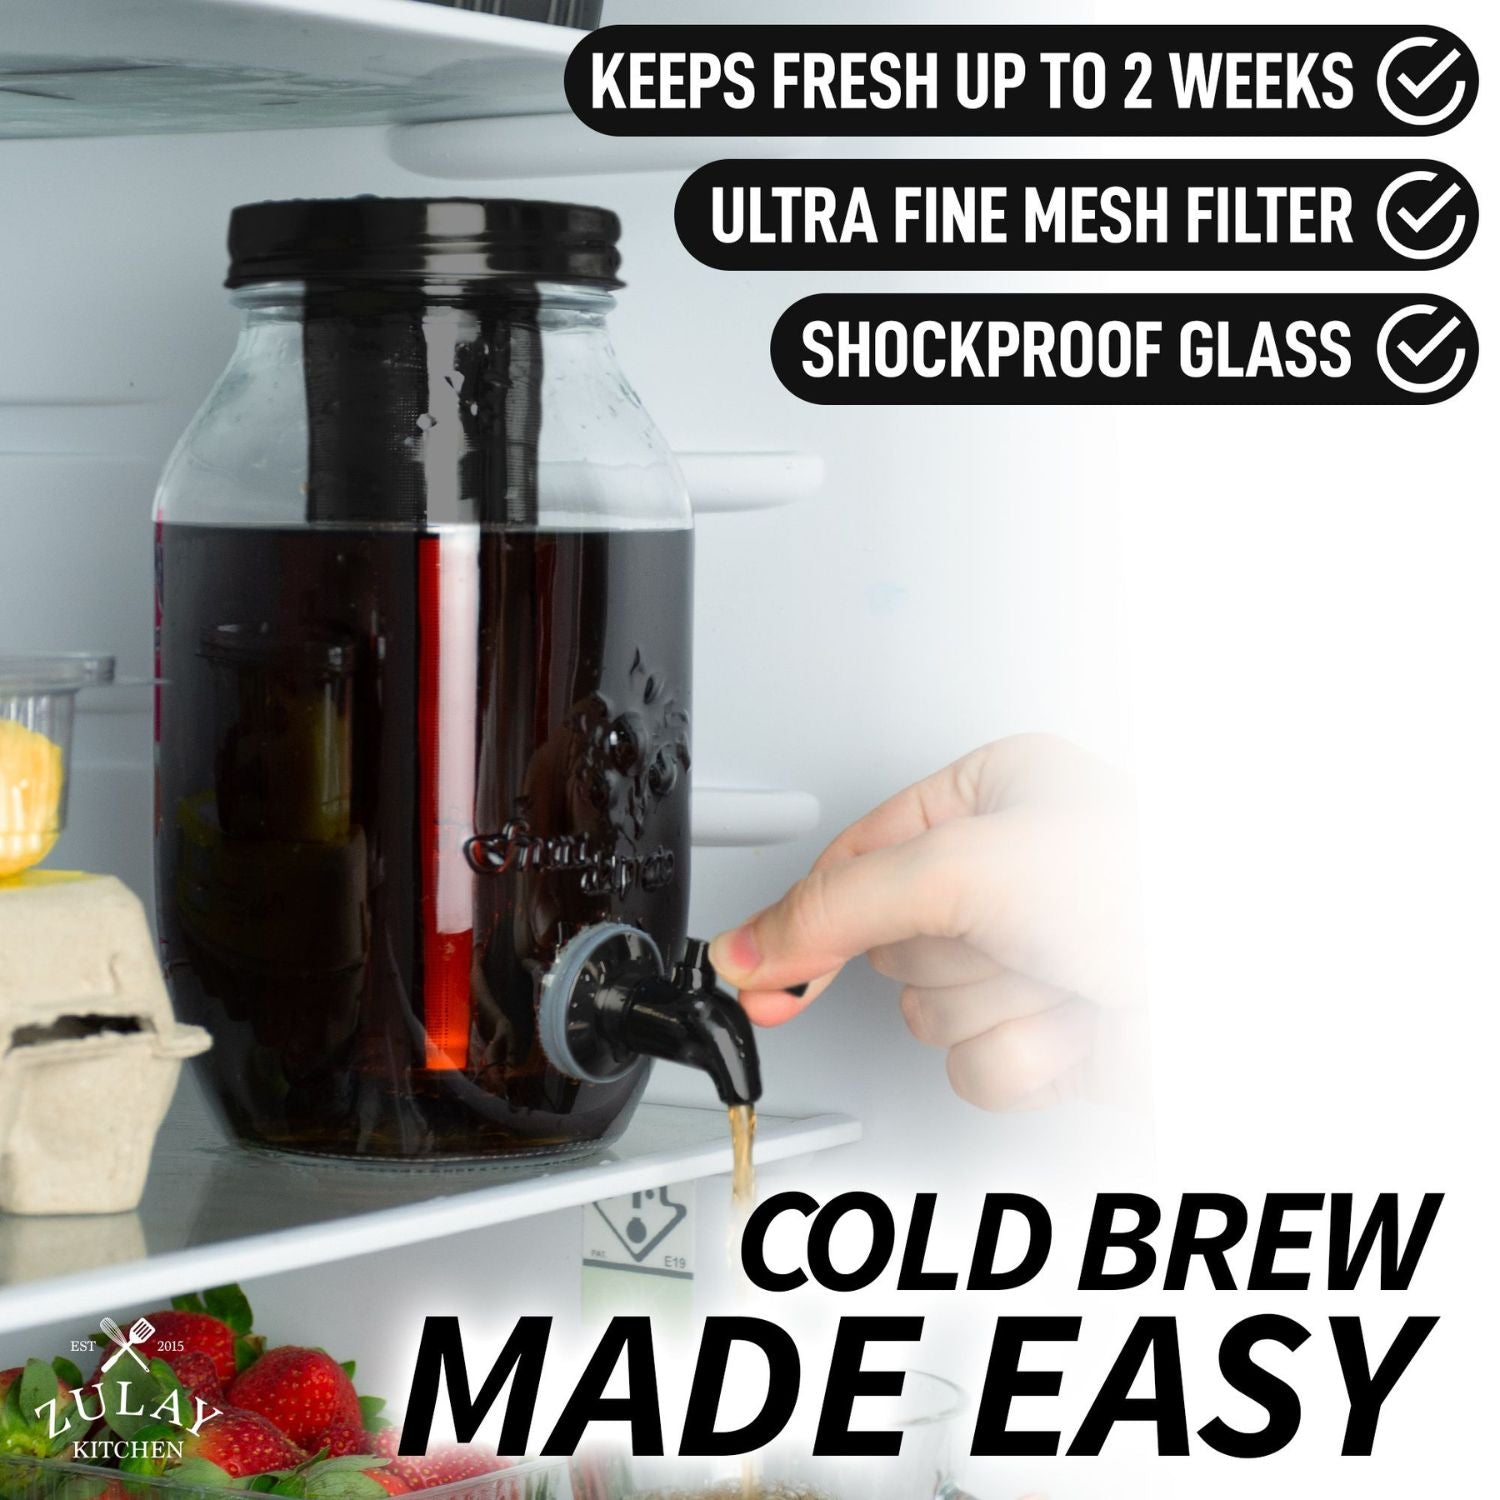 Shockproof glass with ultra fine mesh filter Cold brew coffee maker